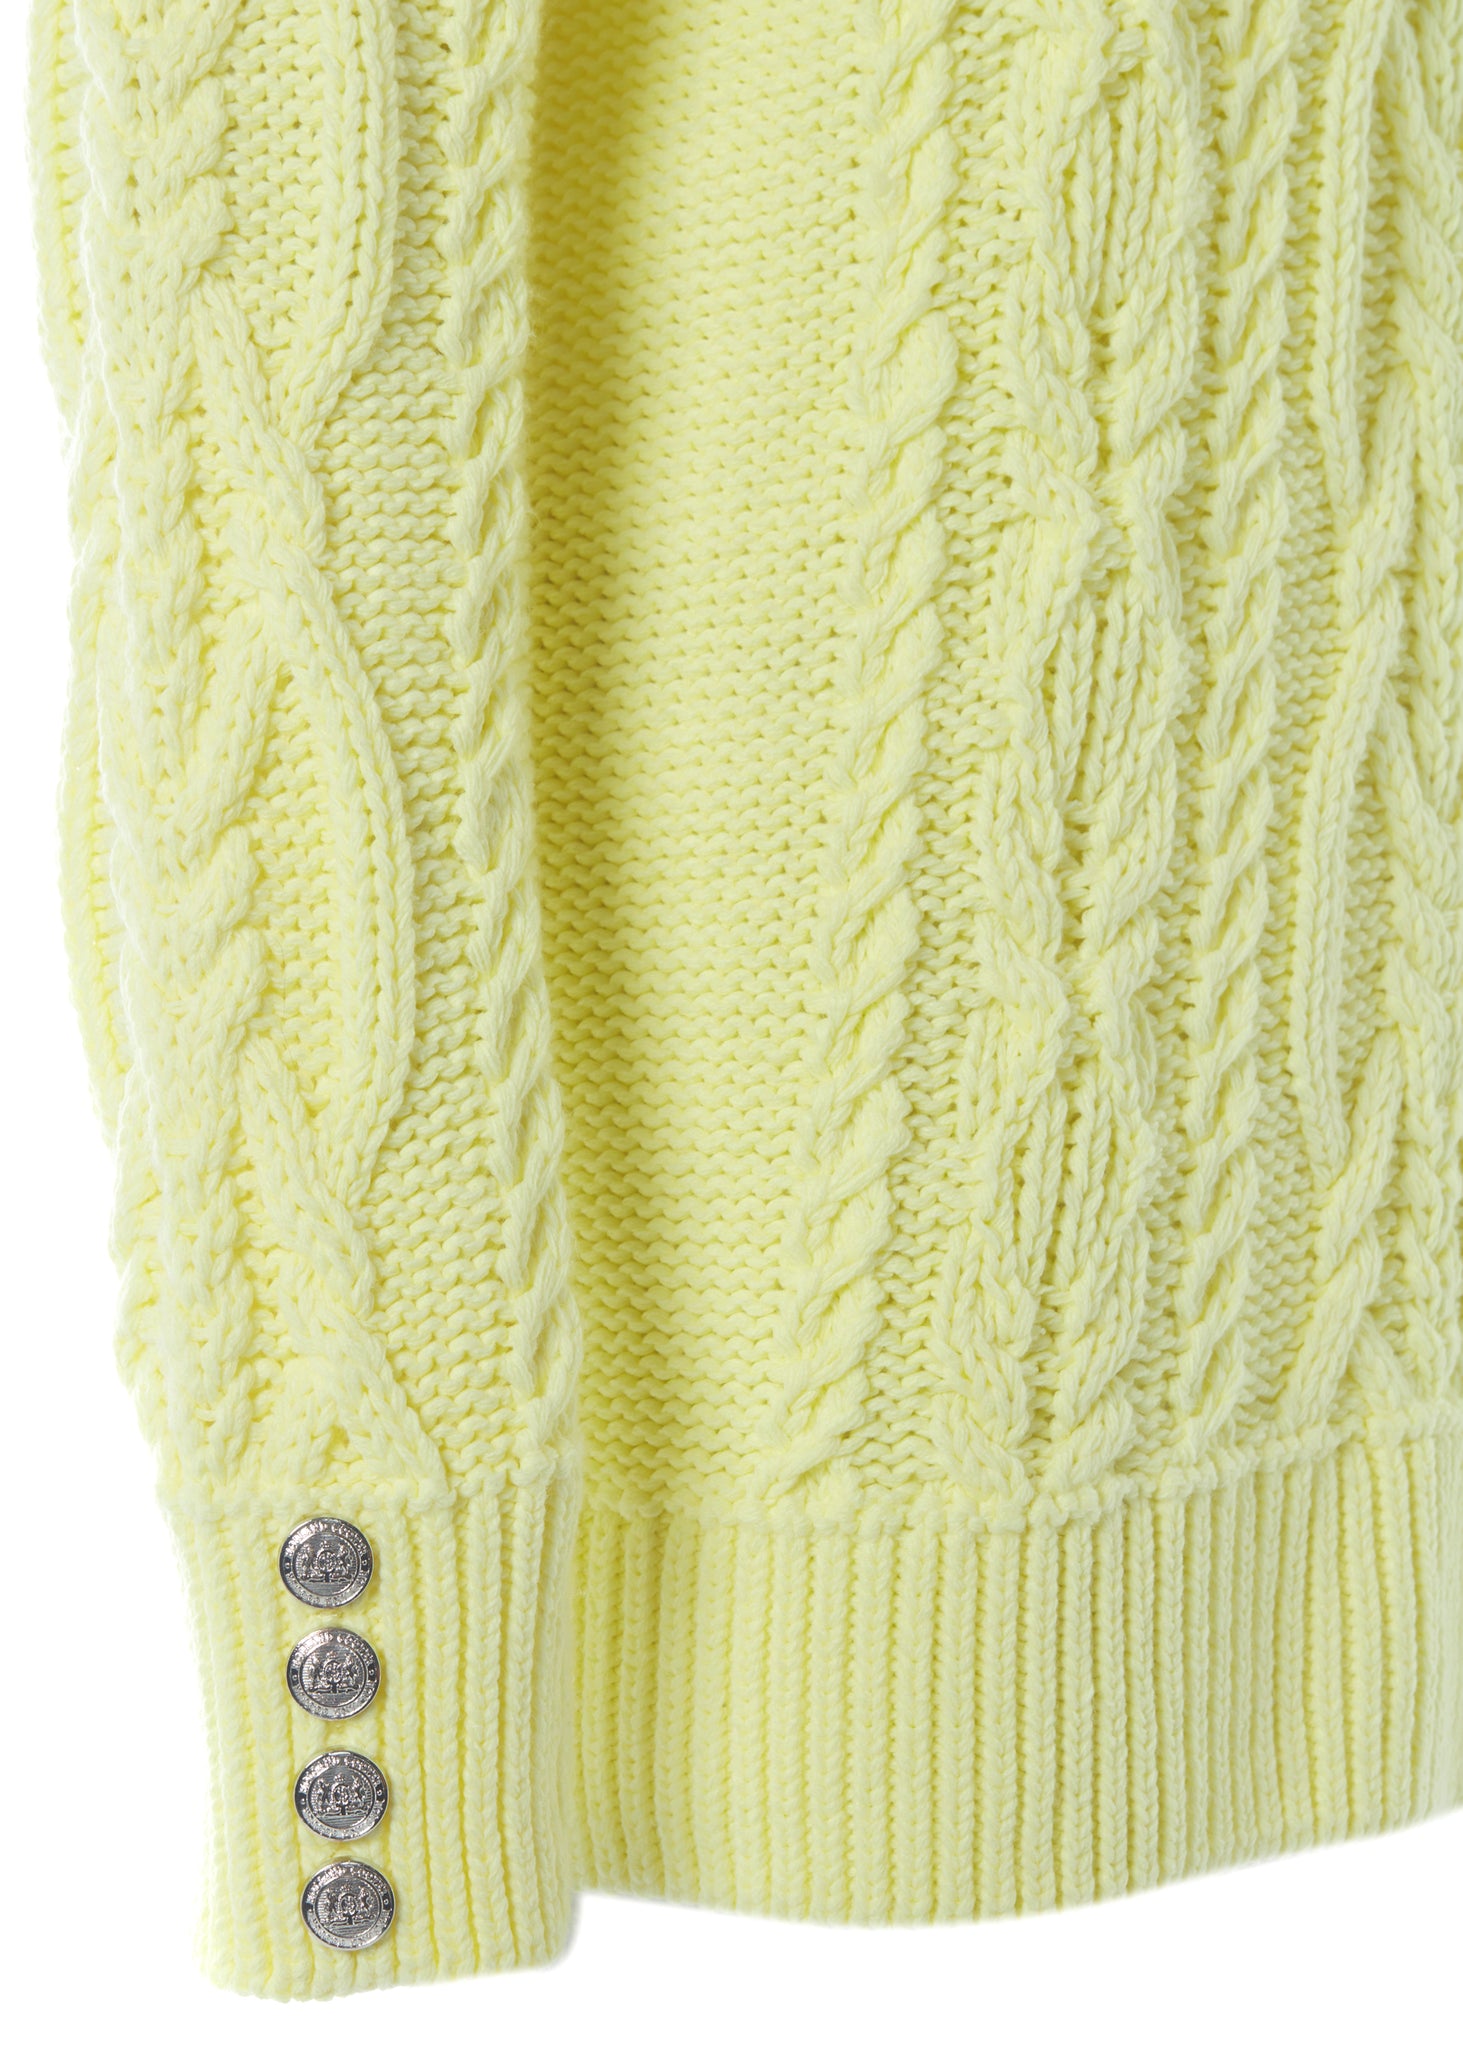 silver button detail on cuffs of chunky cable knit jumper in lemon yellow with ribbed roll neck hem and cuffs